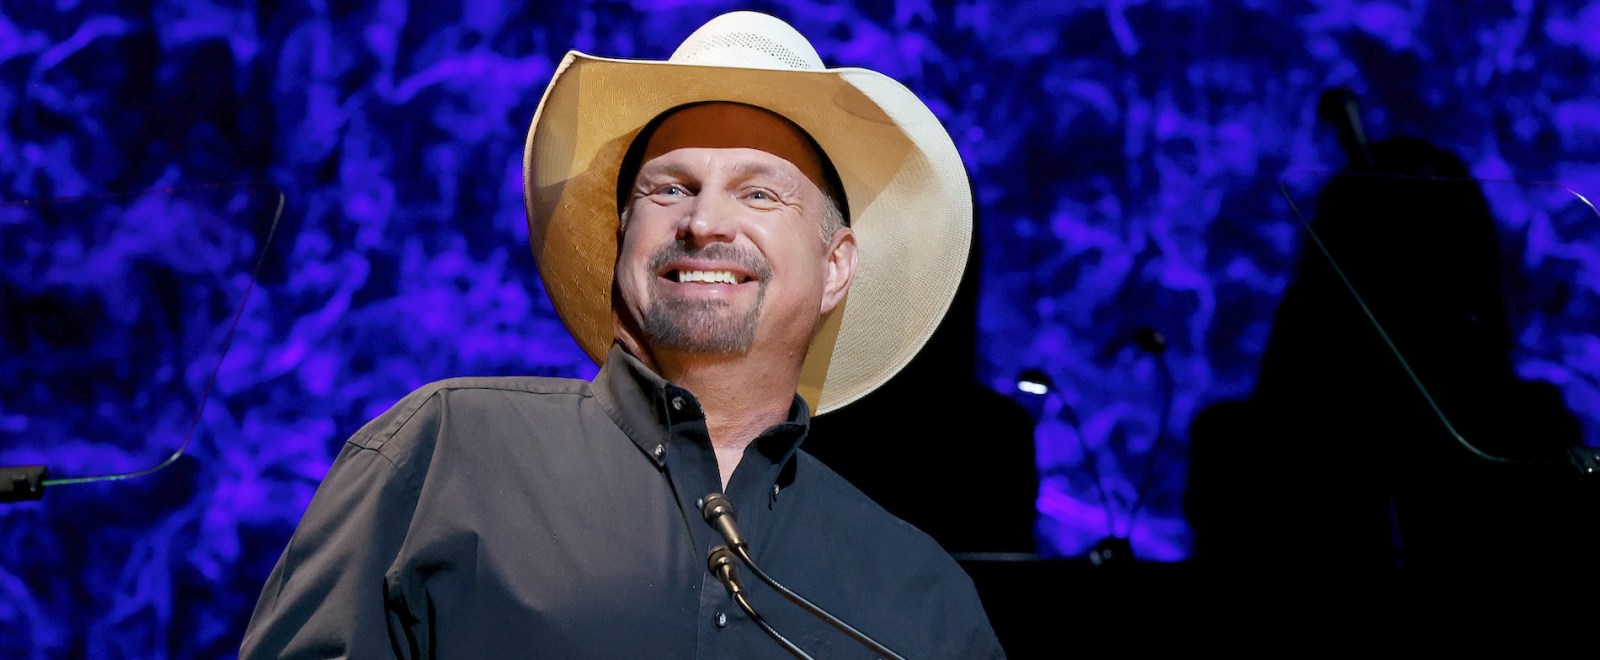 Garth Brooks 2022 Medallion Ceremony at Country Music Hall of Fame and Museum 2022